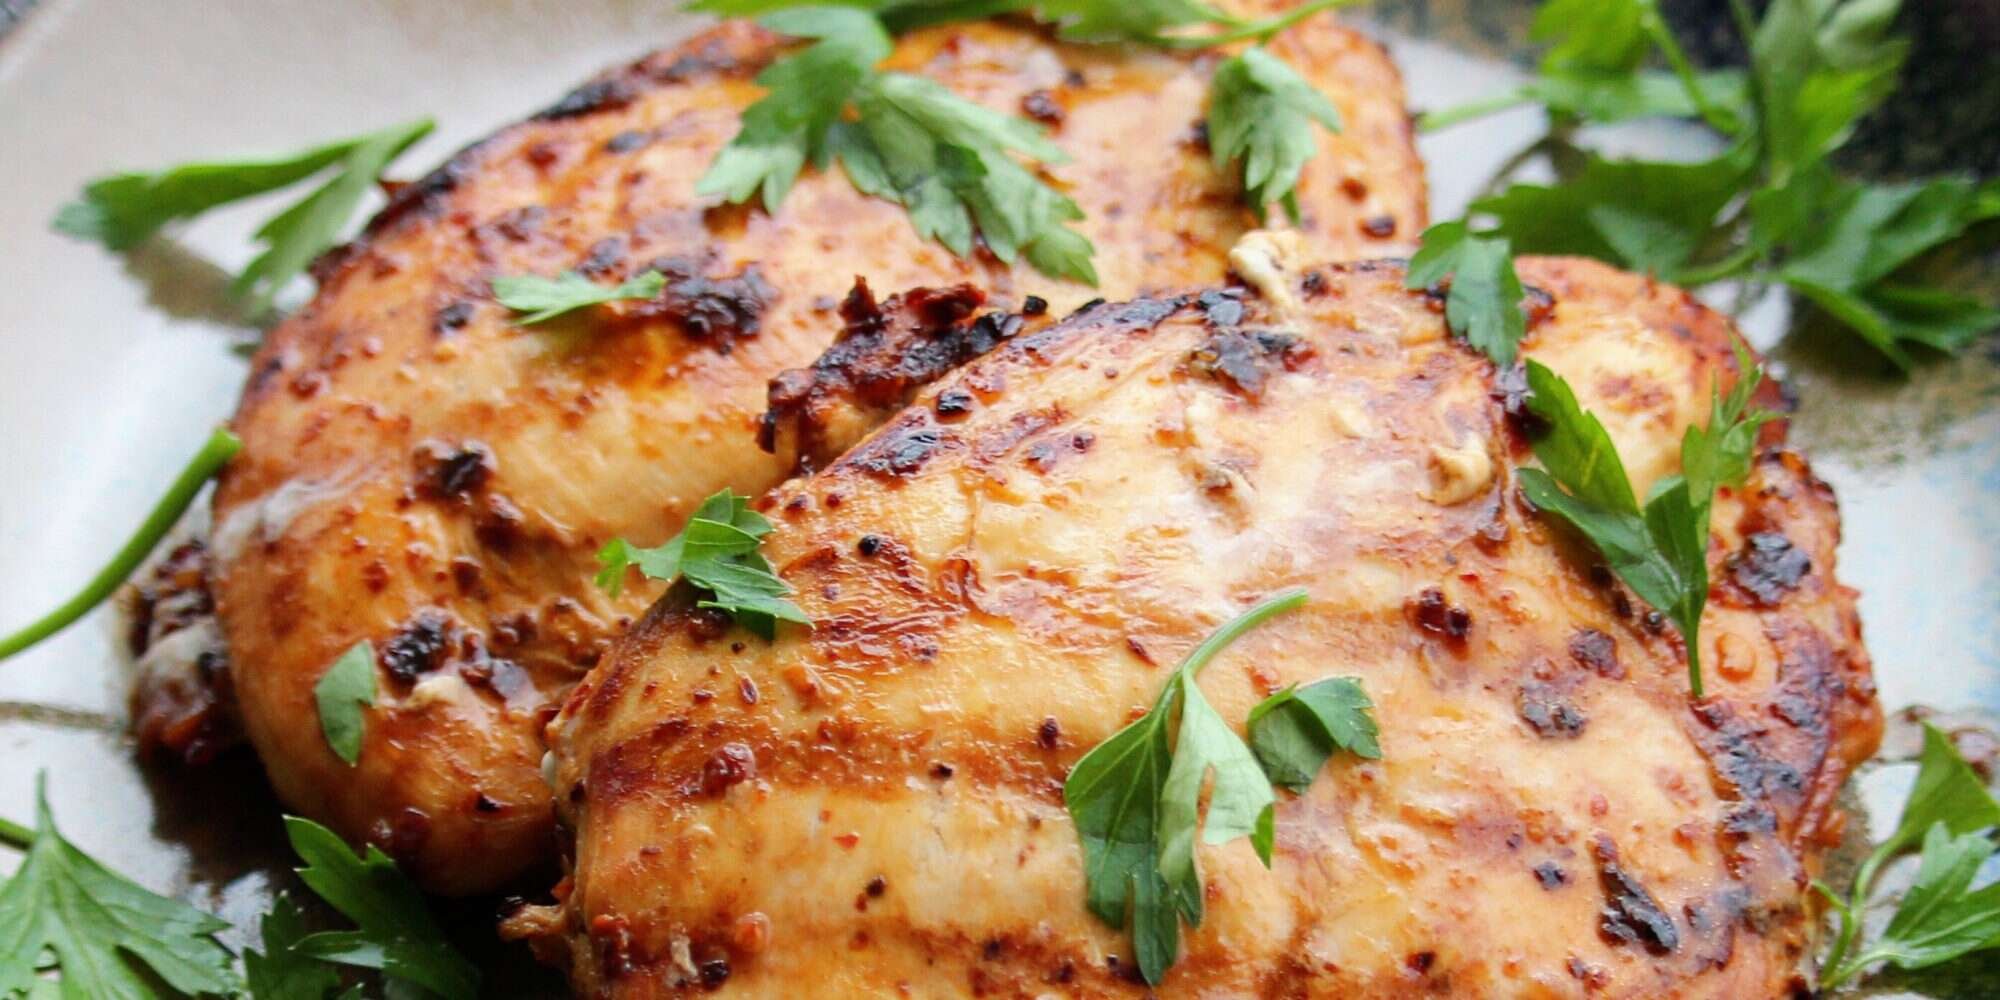 30 Grilled Chicken Thigh Recipes